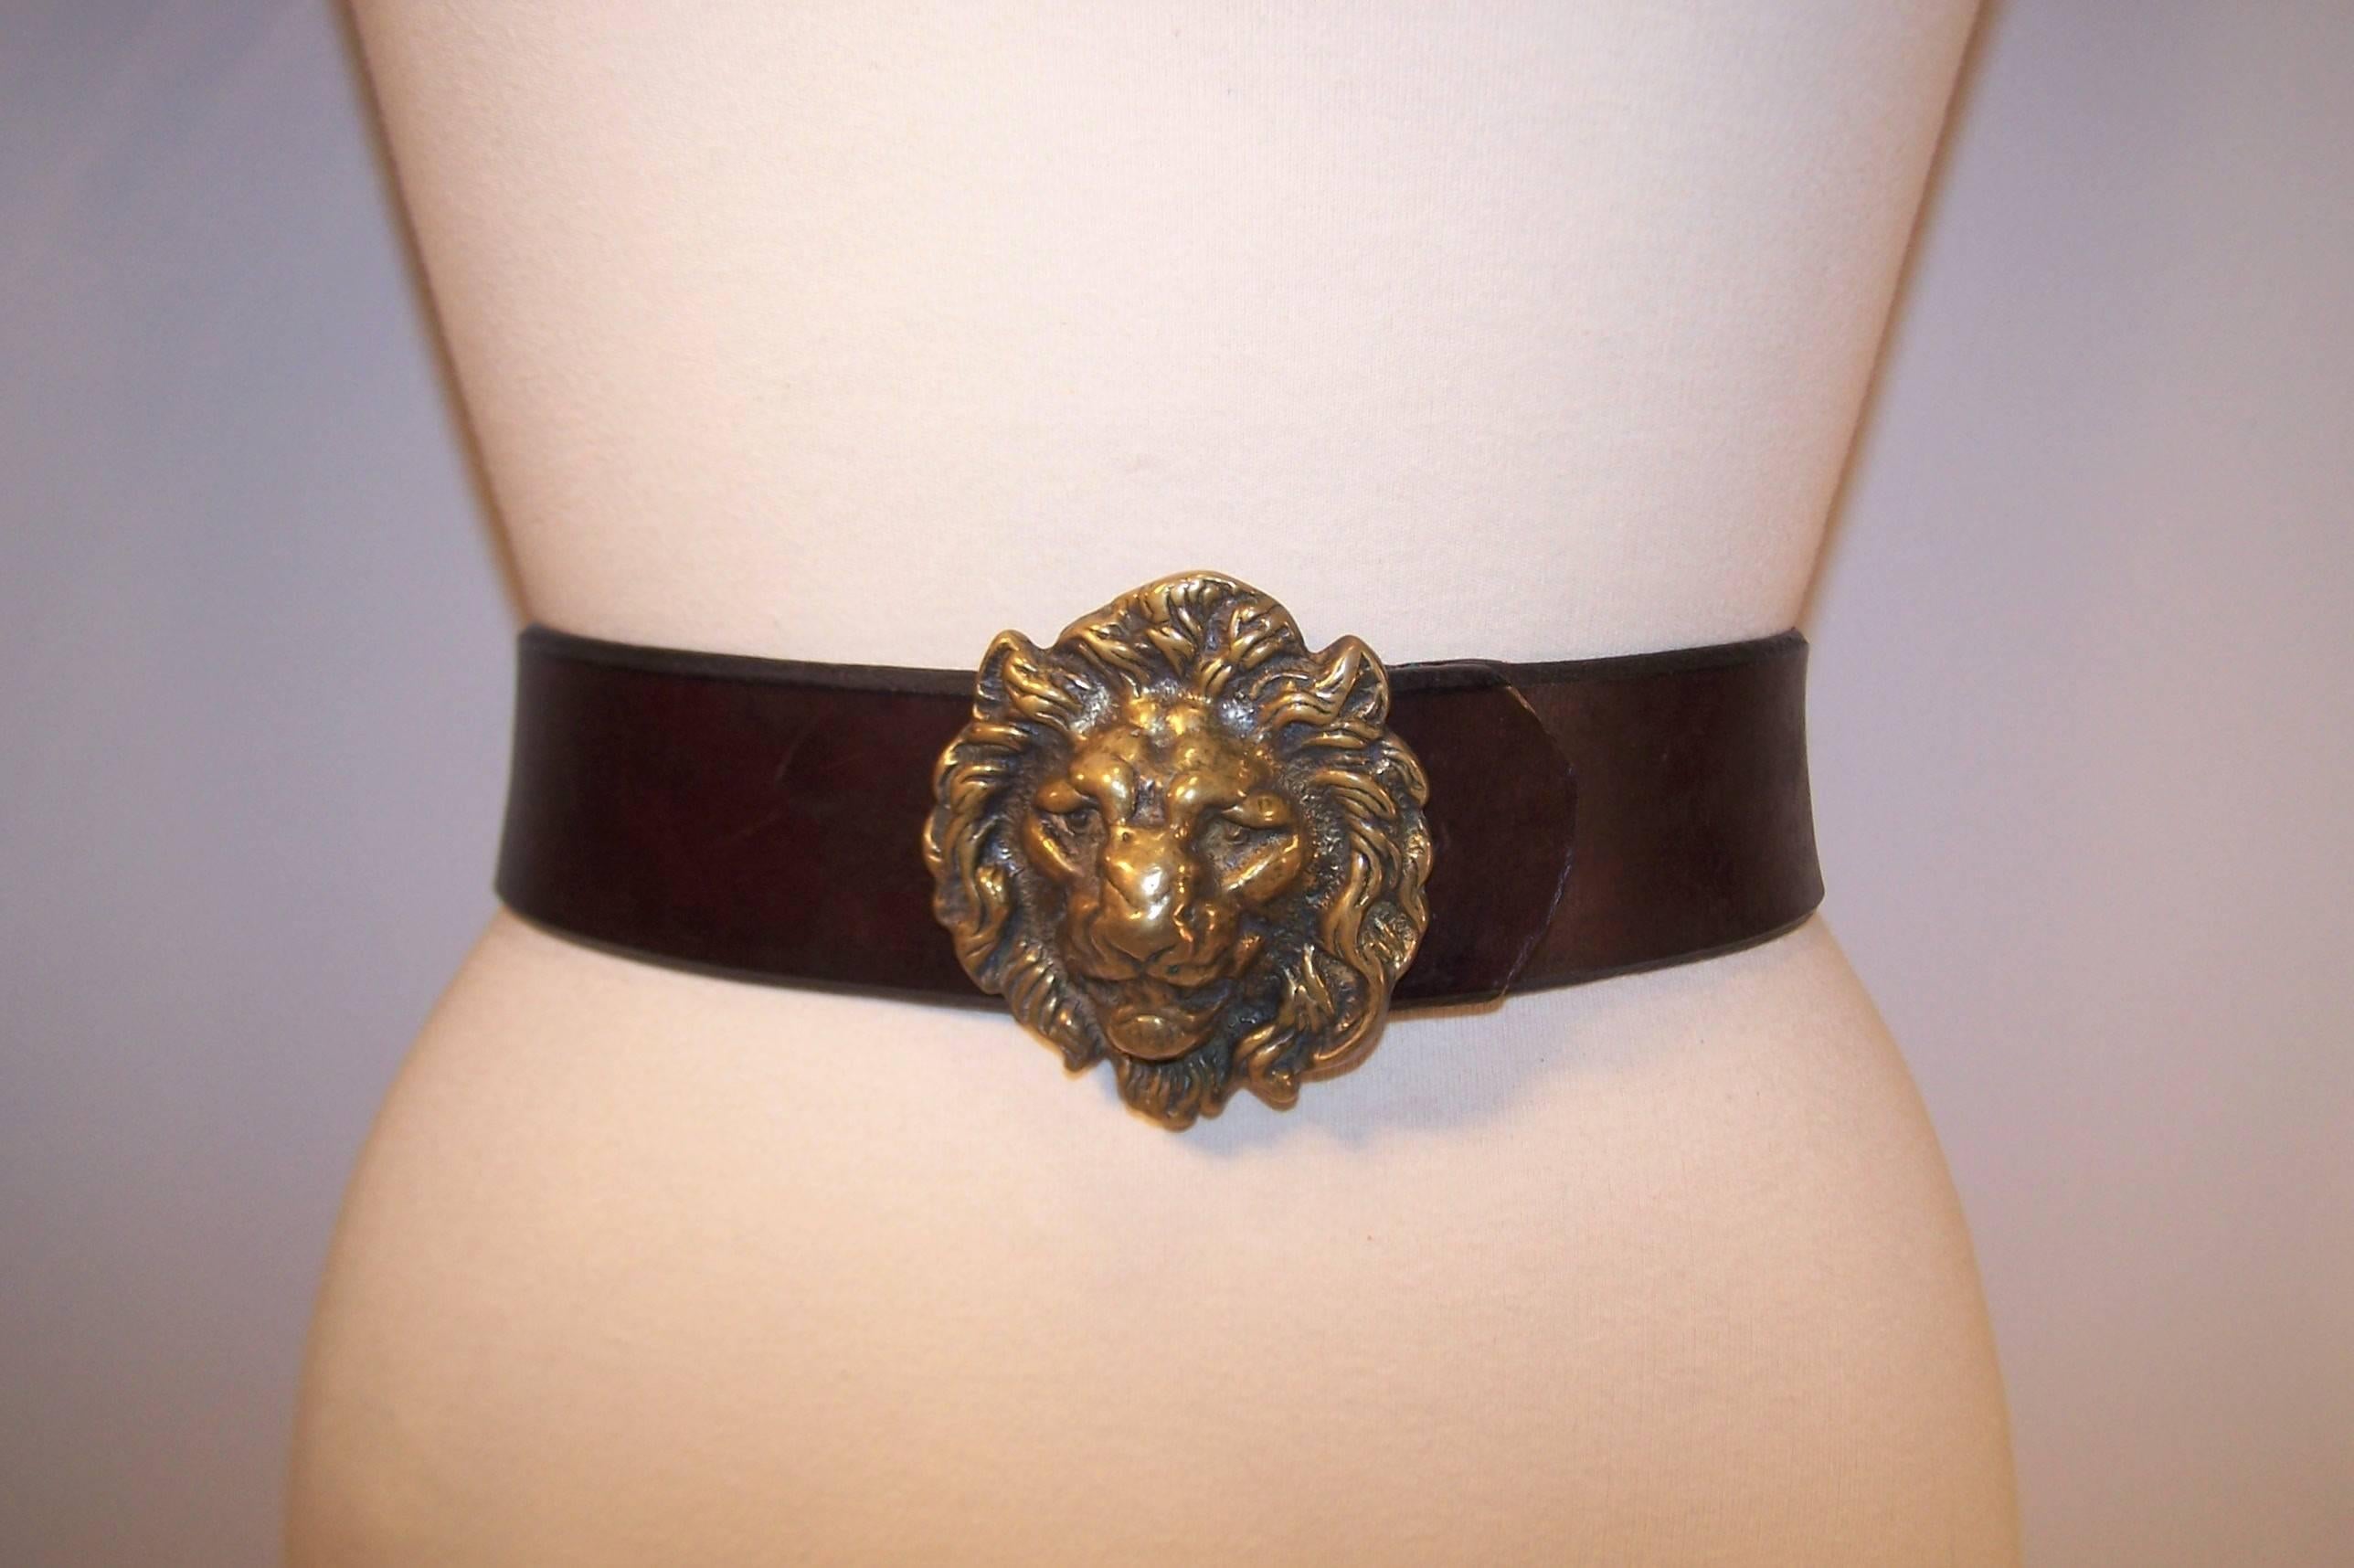 The stately antiqued brass lion buckle is the perfect foil for this thick brown saddle leather belt.  The buckle is marked England on the back and has a hook which securely fits into four adjustable options on the belt.  Both a combination of